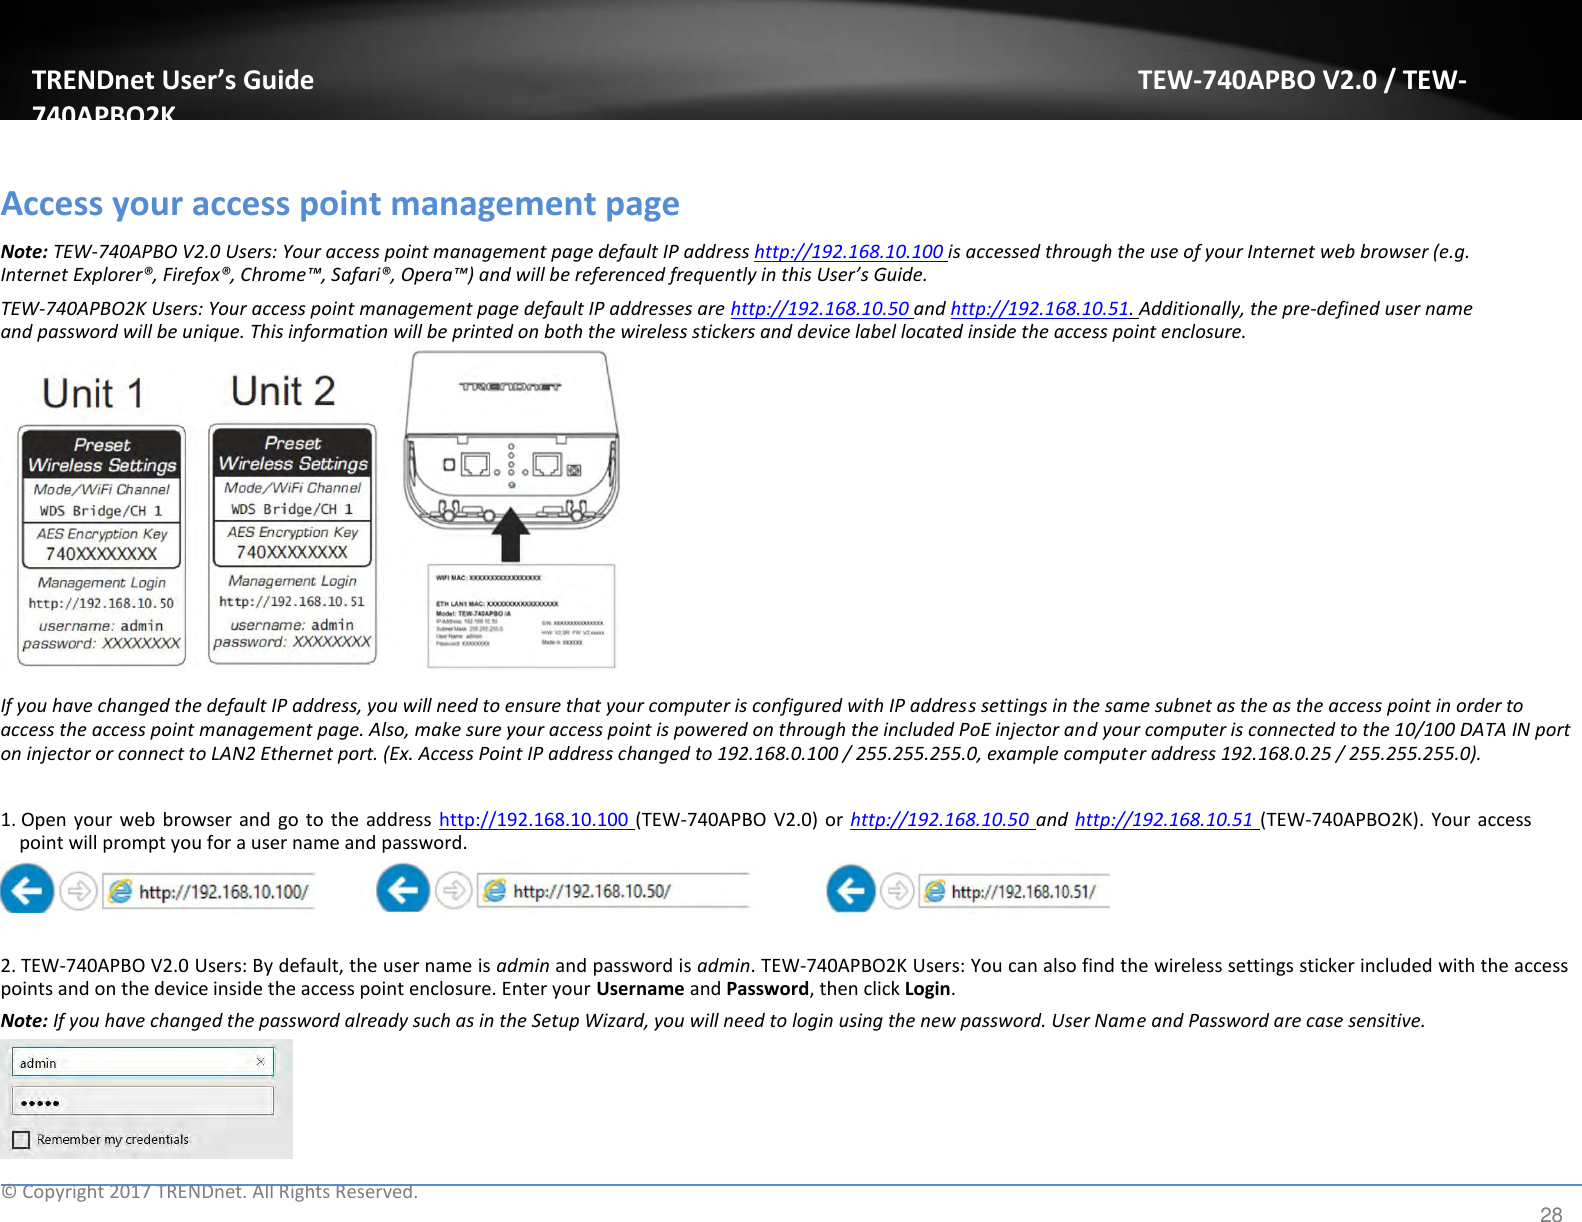 TRENDnet User’s Guide TEW-740APBO V2.0 / TEW-740APBO2K   Access your access point management page  Note: TEW-740APBO V2.0 Users: Your access point management page default IP address http://192.168.10.100 is accessed through the use of your Internet web browser (e.g. Internet Explorer®, Firefox®, Chrome™, Safari®, Opera™) and will be referenced frequently in this User’s Guide.  TEW-740APBO2K Users: Your access point management page default IP addresses are http://192.168.10.50 and http://192.168.10.51. Additionally, the pre-defined user name and password will be unique. This information will be printed on both the wireless stickers and device label located inside the access point enclosure.                 If you have changed the default IP address, you will need to ensure that your computer is configured with IP address settings in the same subnet as the as the access point in order to access the access point management page. Also, make sure your access point is powered on through the included PoE injector and your computer is connected to the 10/100 DATA IN port on injector or connect to LAN2 Ethernet port. (Ex. Access Point IP address changed to 192.168.0.100 / 255.255.255.0, example computer address 192.168.0.25 / 255.255.255.0).   1. Open your  web browser and  go to  the address  http://192.168.10.100 (TEW-740APBO V2.0) or  http://192.168.10.50 and http://192.168.10.51 (TEW-740APBO2K).  Your  access point will prompt you for a user name and password.     2. TEW-740APBO V2.0 Users: By default, the user name is admin and password is admin. TEW-740APBO2K Users: You can also find the wireless settings sticker included with the access points and on the device inside the access point enclosure. Enter your Username and Password, then click Login.  Note: If you have changed the password already such as in the Setup Wizard, you will need to login using the new password. User Name and Password are case sensitive.        ©  Copyright 2017 TRENDnet. All Rights Reserved. 28 